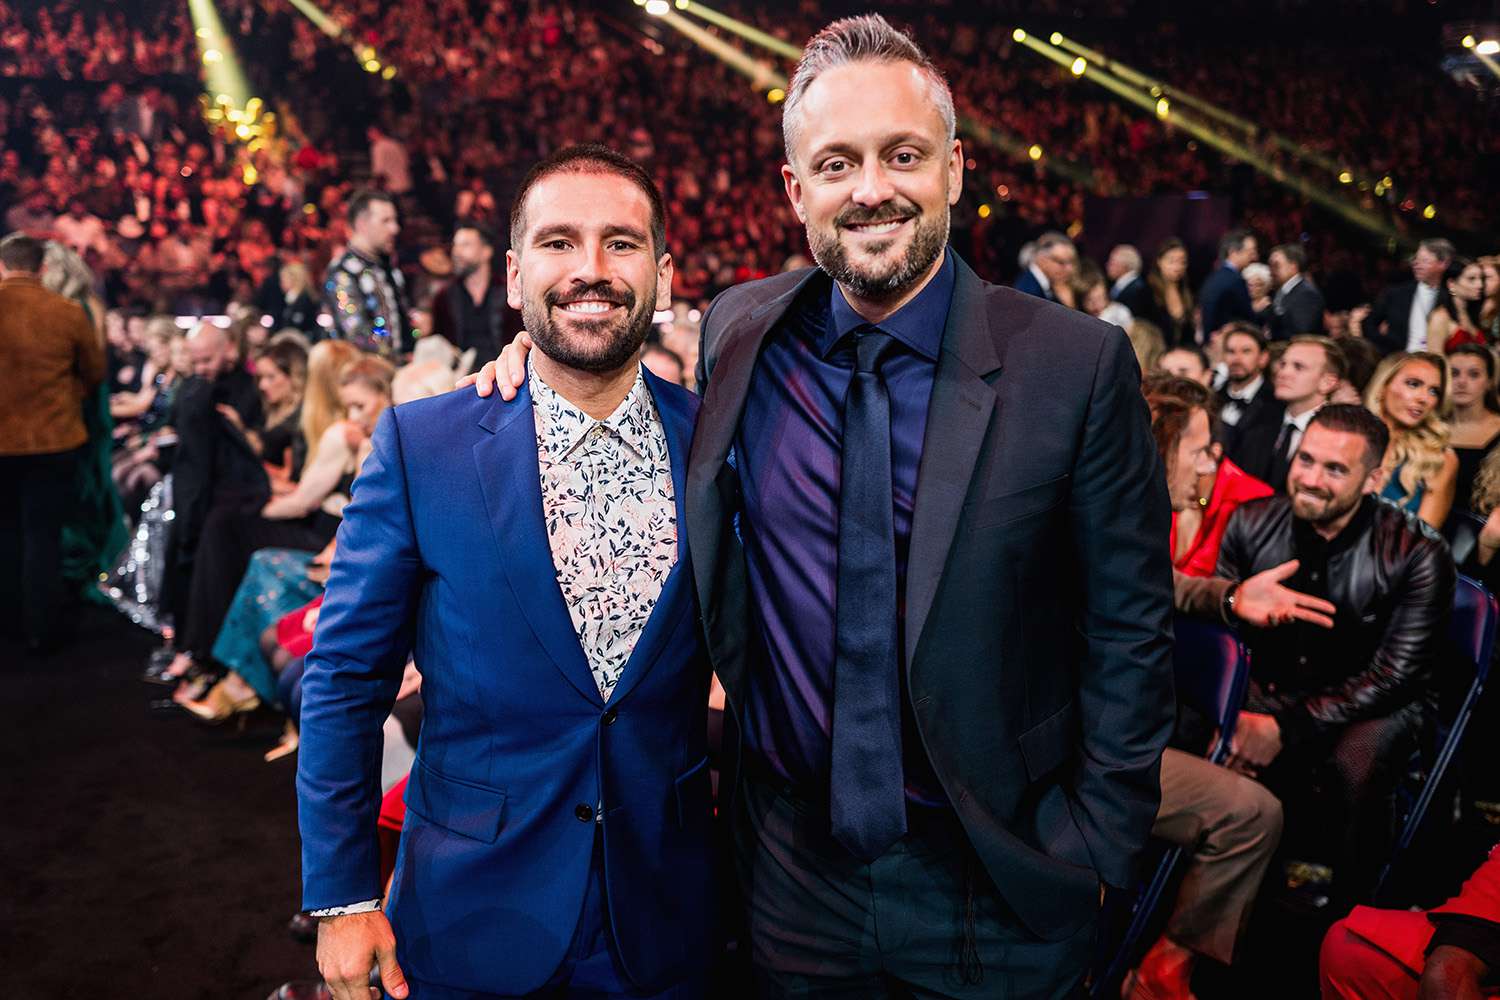 Shay Mooney of Dan + Shay and Nate Bargatze attend the 57th Annual Country Music Association Awards